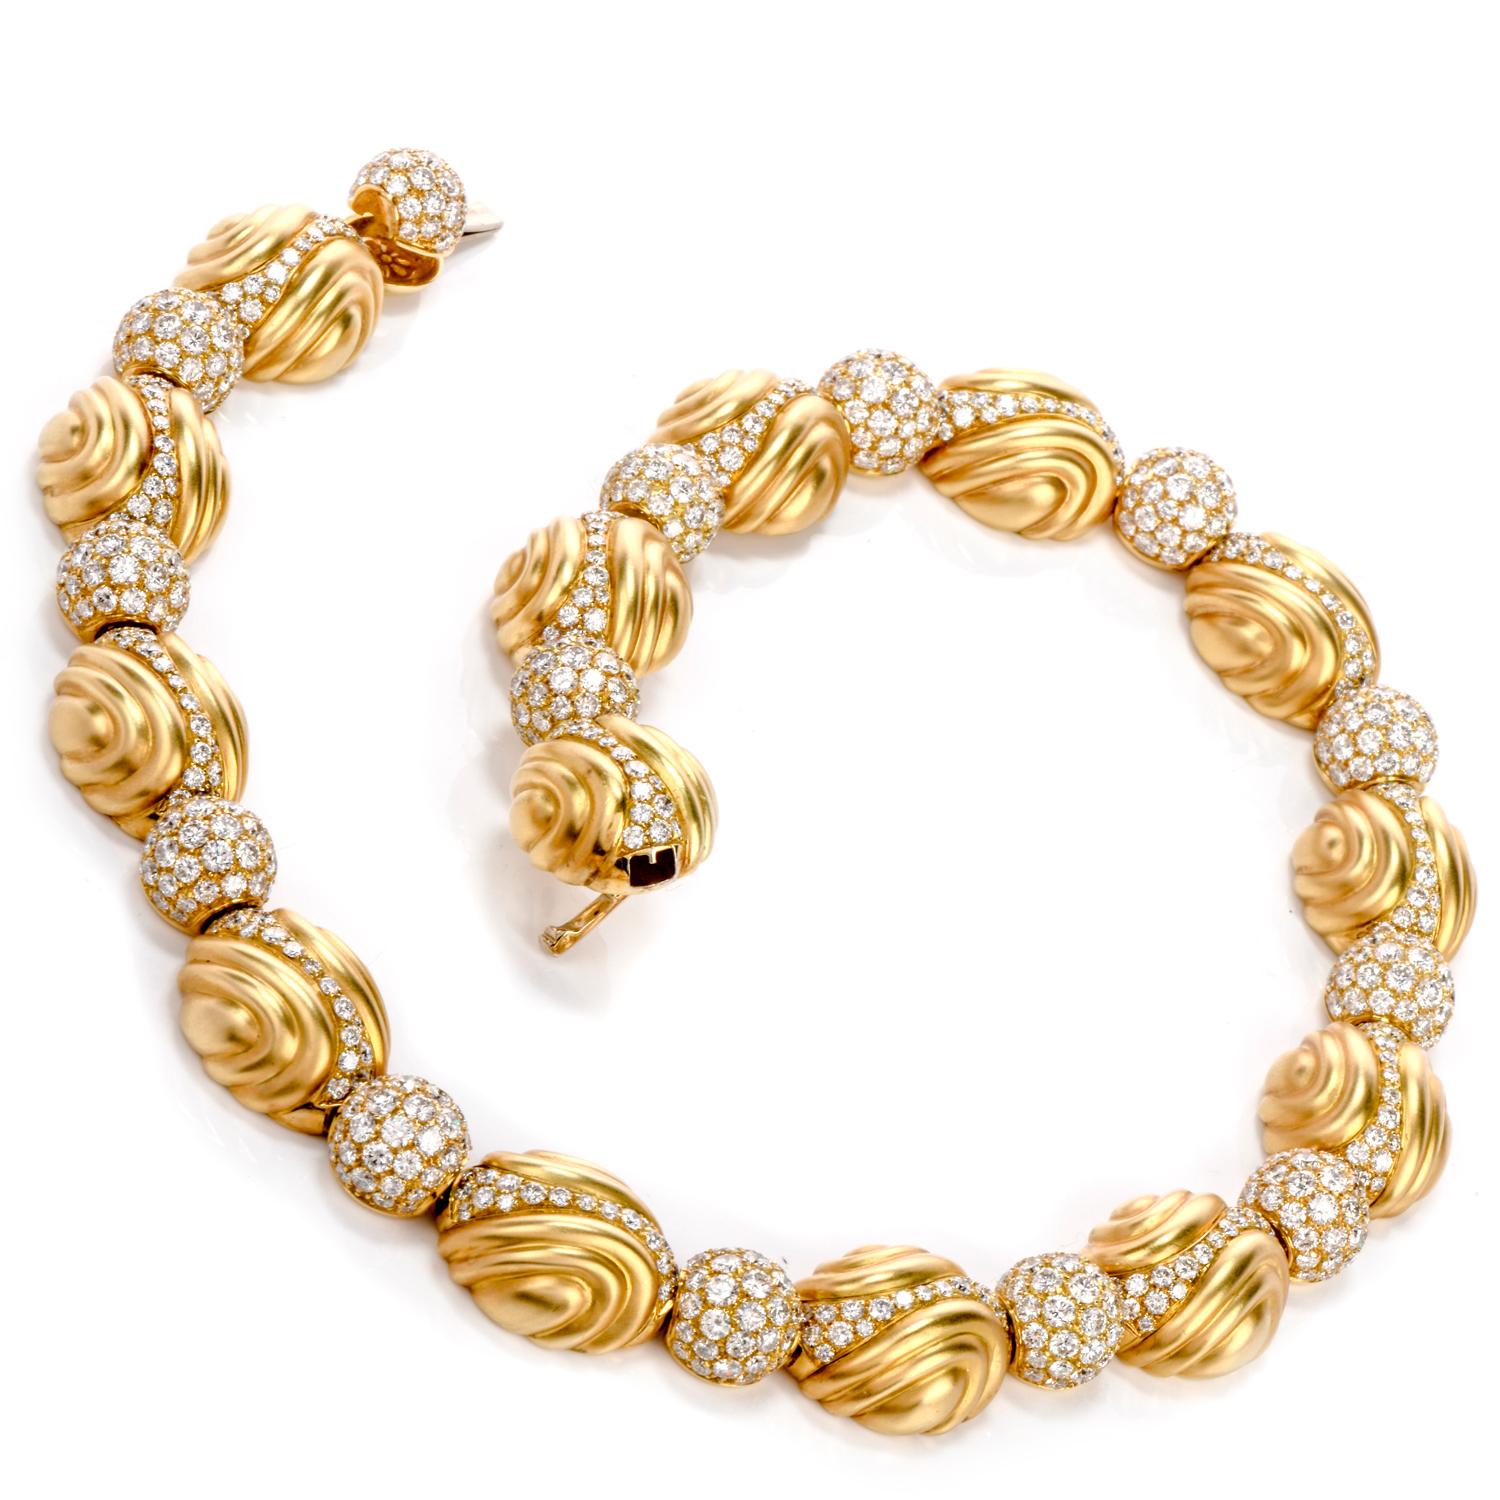 This Ambrosi  designer necklace was inspired by an orbital and elliptical

motif and crafted in fine 18K yellow gold.

14 individual links are fashioned into elliptical and fantasy shapes

while 14 spherical-shaped diamond globes serve to 

connect